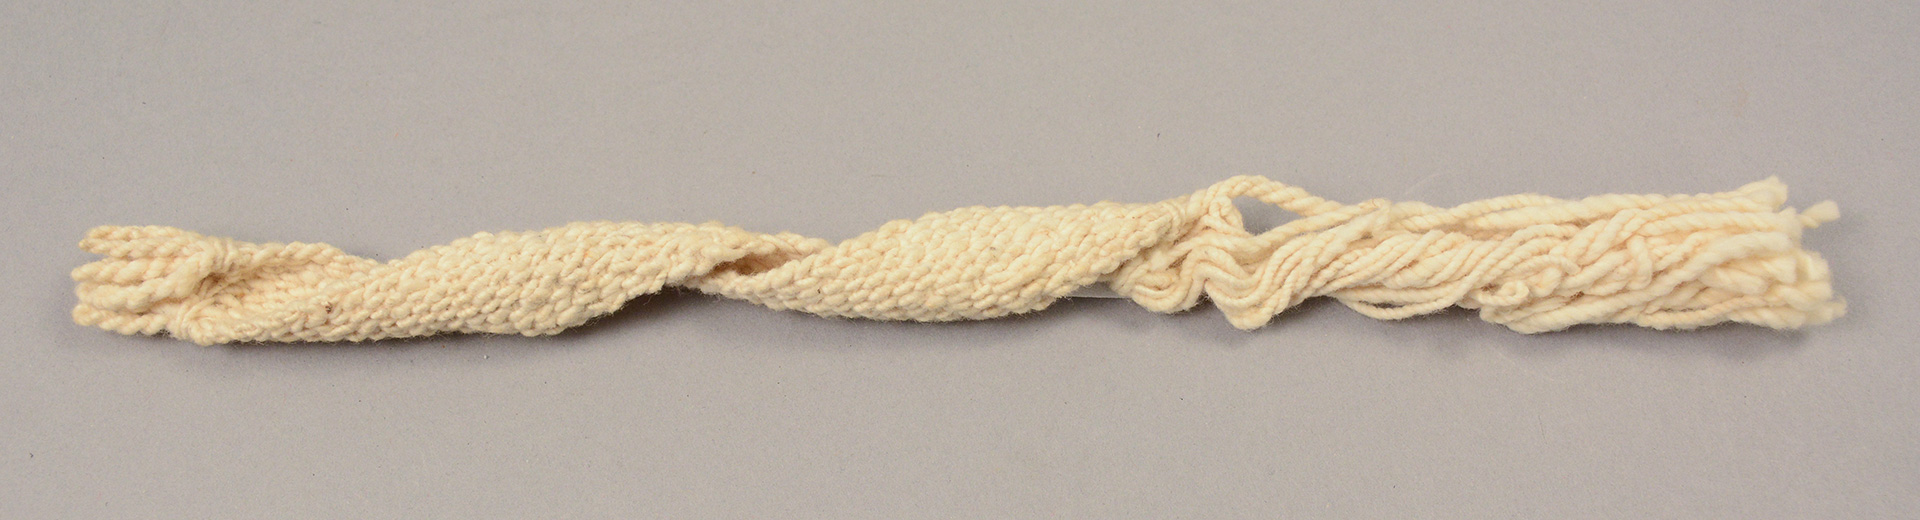 woven strip of white yarn with frayed edges